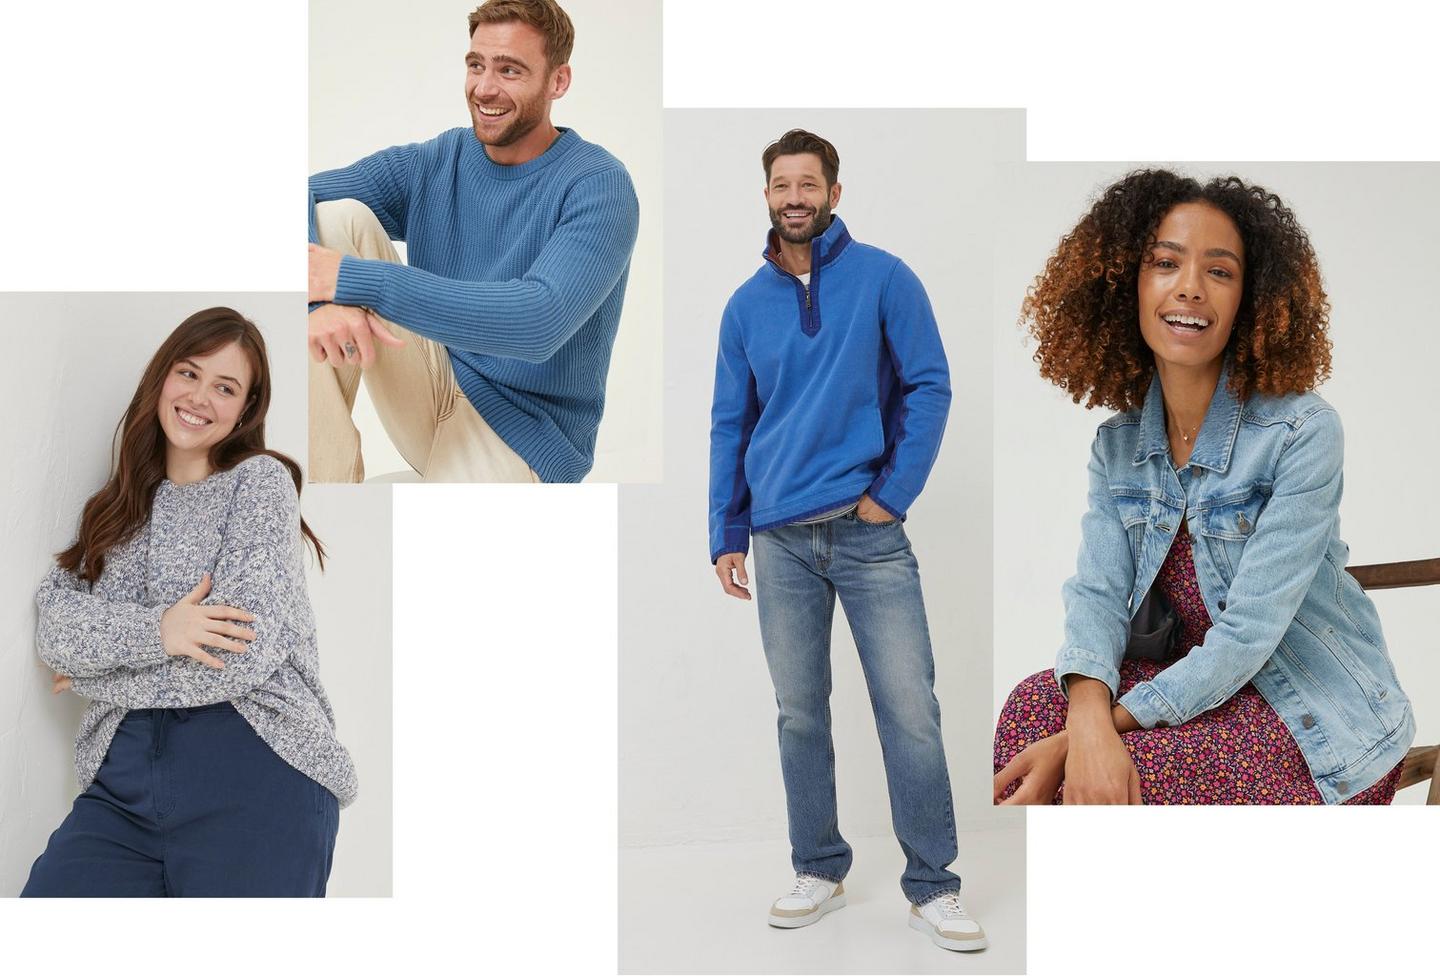 Women & men wearing a variety of blue clothing including jumpers, joggers, a pique cotton sweatshirt, jeans & a denim jacket.